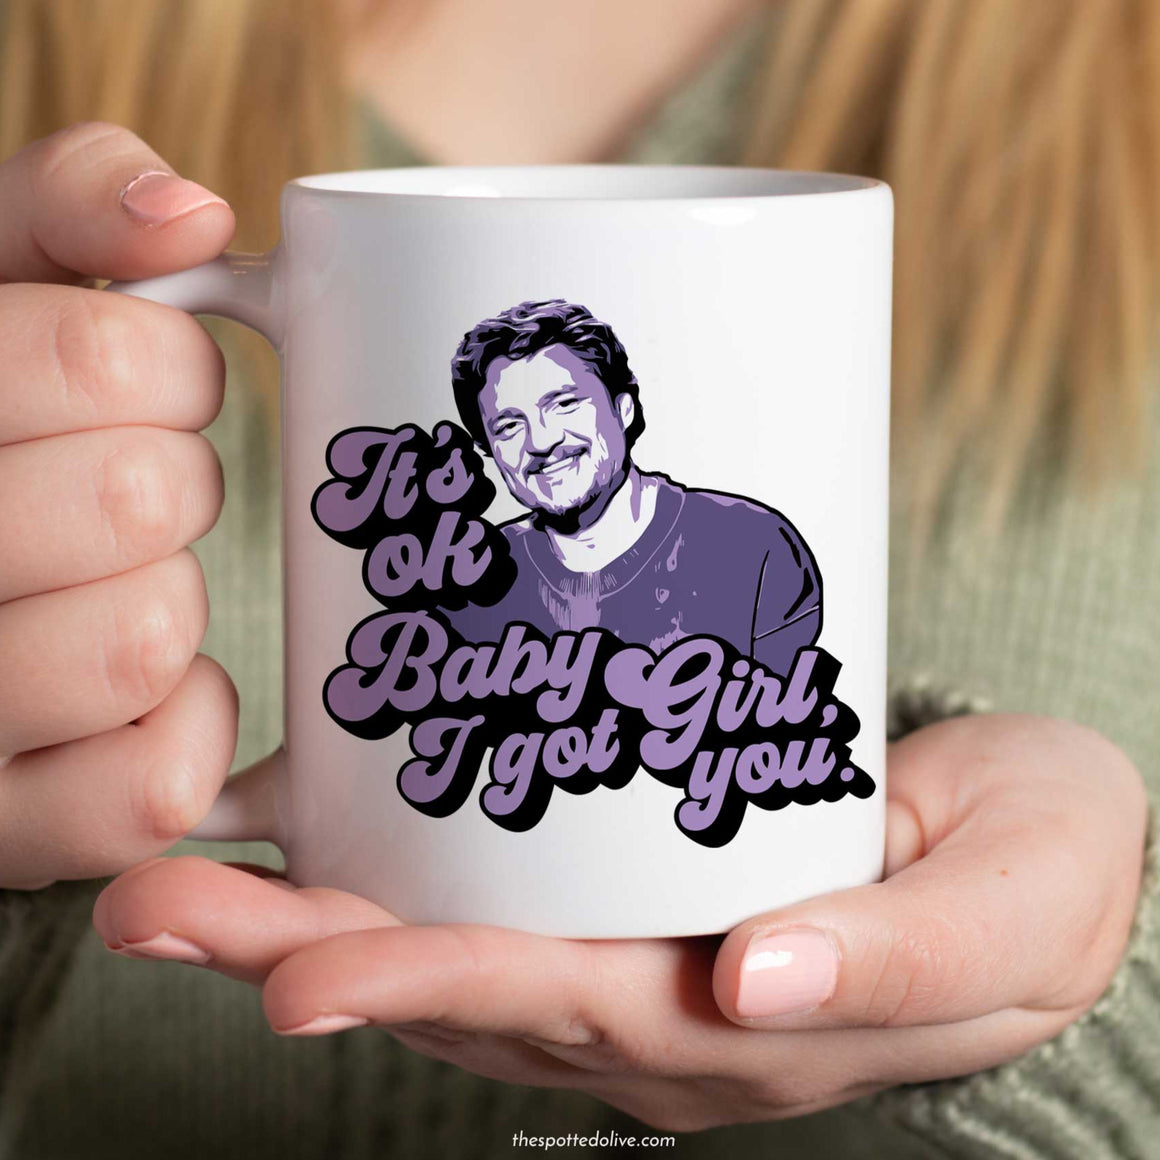 Pedro Pascal Baby Girl I Got You Mug by The Spotted Olive insitu